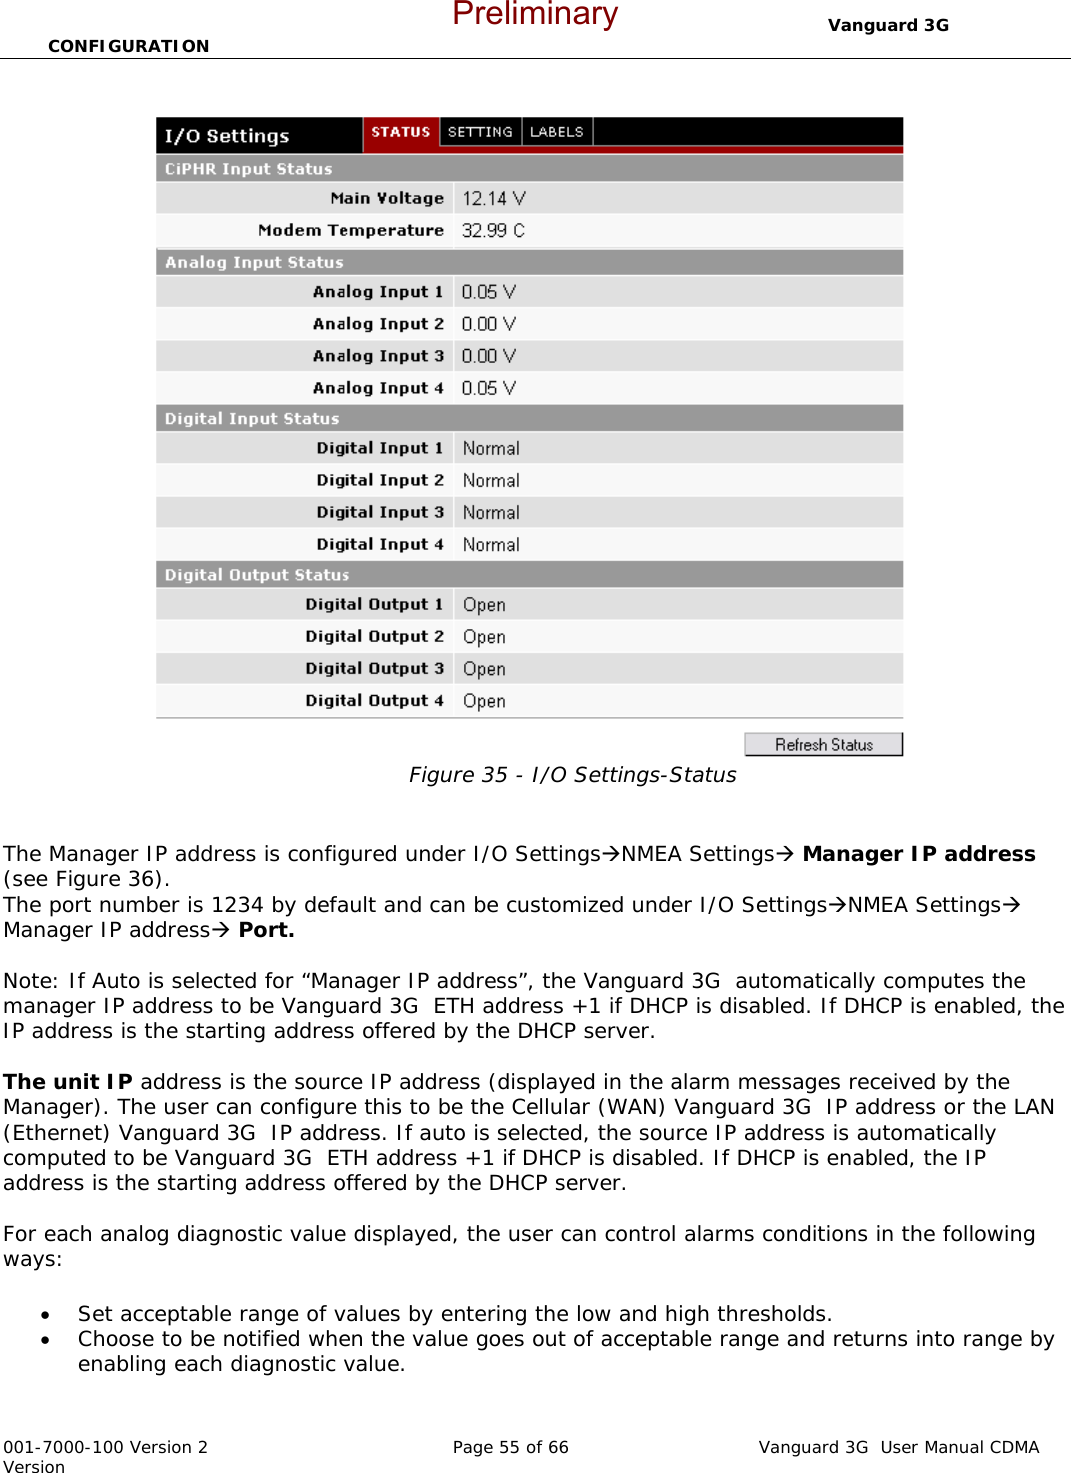                                  Vanguard 3G  CONFIGURATION  001-7000-100 Version 2       Page 55 of 66       Vanguard 3G  User Manual CDMA Version  Figure 35 - I/O Settings-Status   The Manager IP address is configured under I/O SettingsÆNMEA SettingsÆ Manager IP address (see Figure 36).  The port number is 1234 by default and can be customized under I/O SettingsÆNMEA SettingsÆ Manager IP addressÆ Port.  Note: If Auto is selected for “Manager IP address”, the Vanguard 3G  automatically computes the manager IP address to be Vanguard 3G  ETH address +1 if DHCP is disabled. If DHCP is enabled, the IP address is the starting address offered by the DHCP server.   The unit IP address is the source IP address (displayed in the alarm messages received by the Manager). The user can configure this to be the Cellular (WAN) Vanguard 3G  IP address or the LAN (Ethernet) Vanguard 3G  IP address. If auto is selected, the source IP address is automatically computed to be Vanguard 3G  ETH address +1 if DHCP is disabled. If DHCP is enabled, the IP address is the starting address offered by the DHCP server.  For each analog diagnostic value displayed, the user can control alarms conditions in the following ways:  • Set acceptable range of values by entering the low and high thresholds.  • Choose to be notified when the value goes out of acceptable range and returns into range by enabling each diagnostic value.  Preliminary